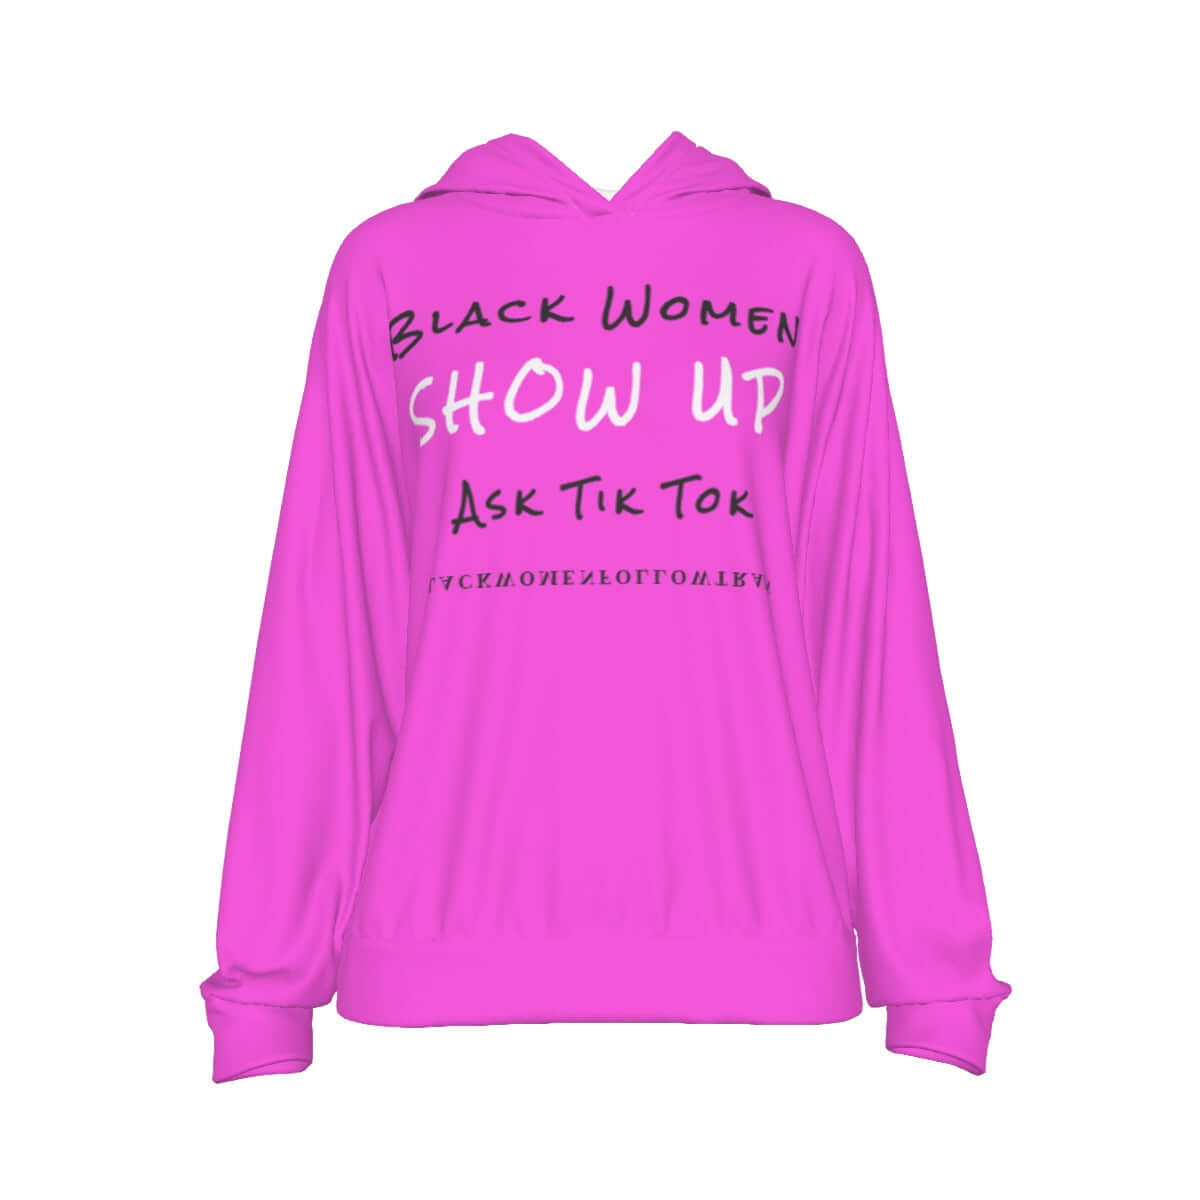 BLACK WOMEN SHOW UP! Ask Tik Tok All-Over Print Women's Casual Hoodie